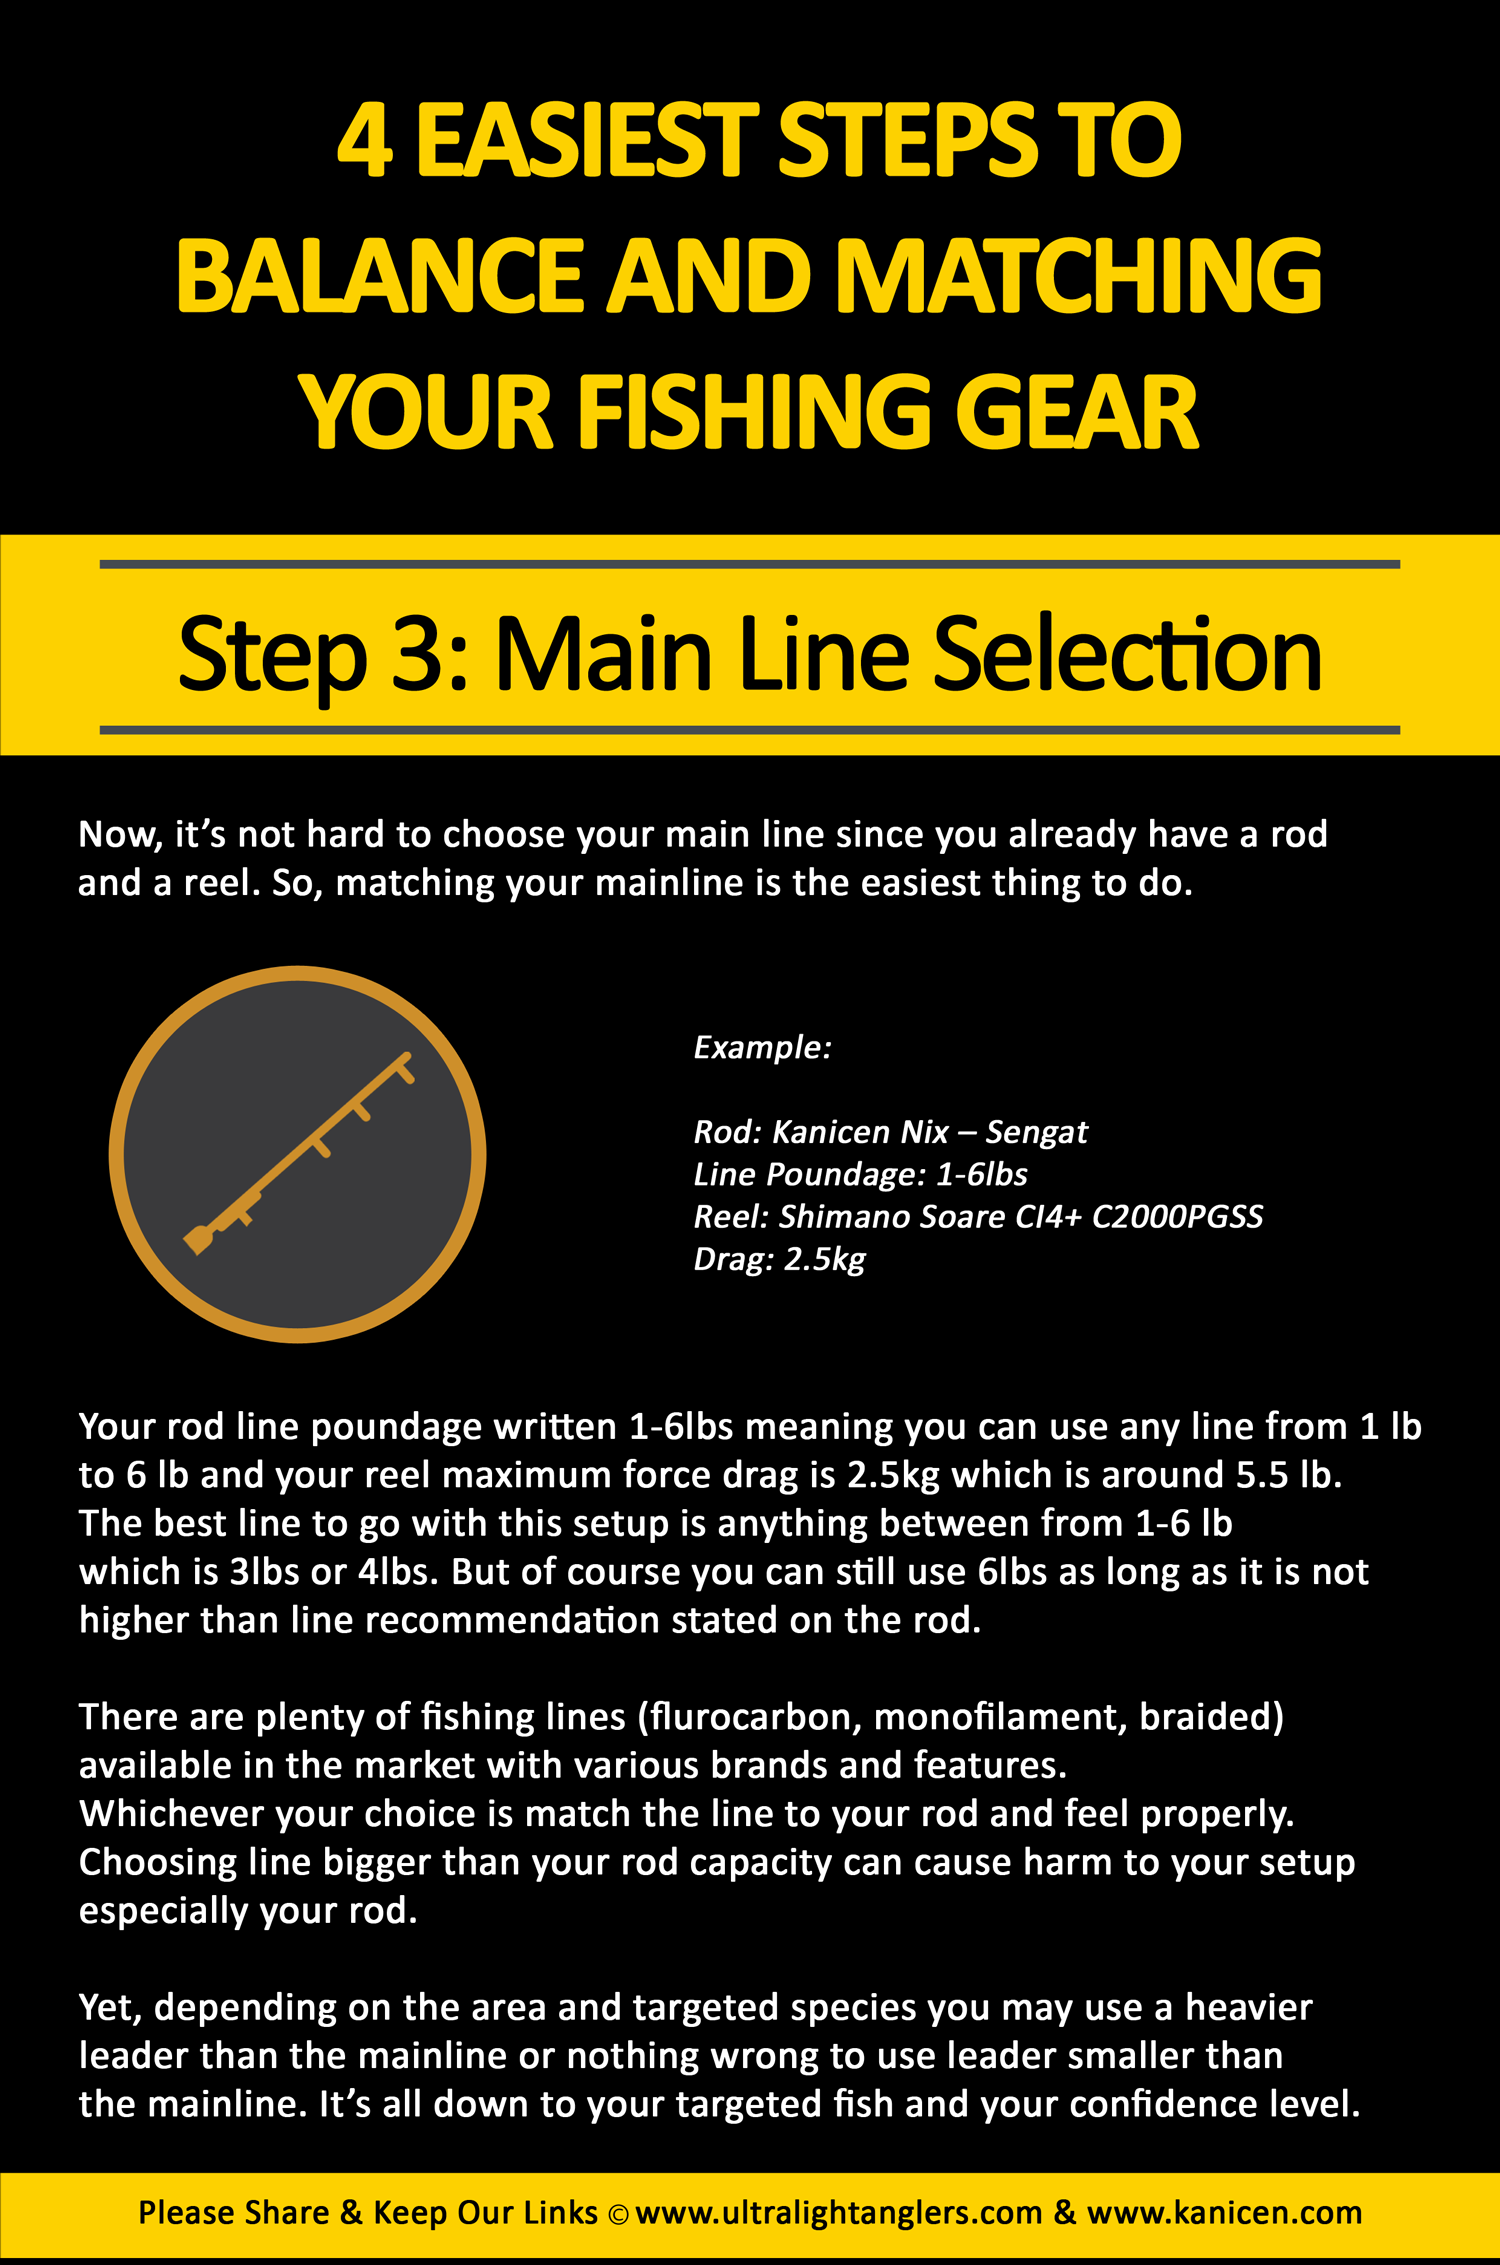 step-3-mainline-selection-steps-balance-and-matching-your-fishing-gears